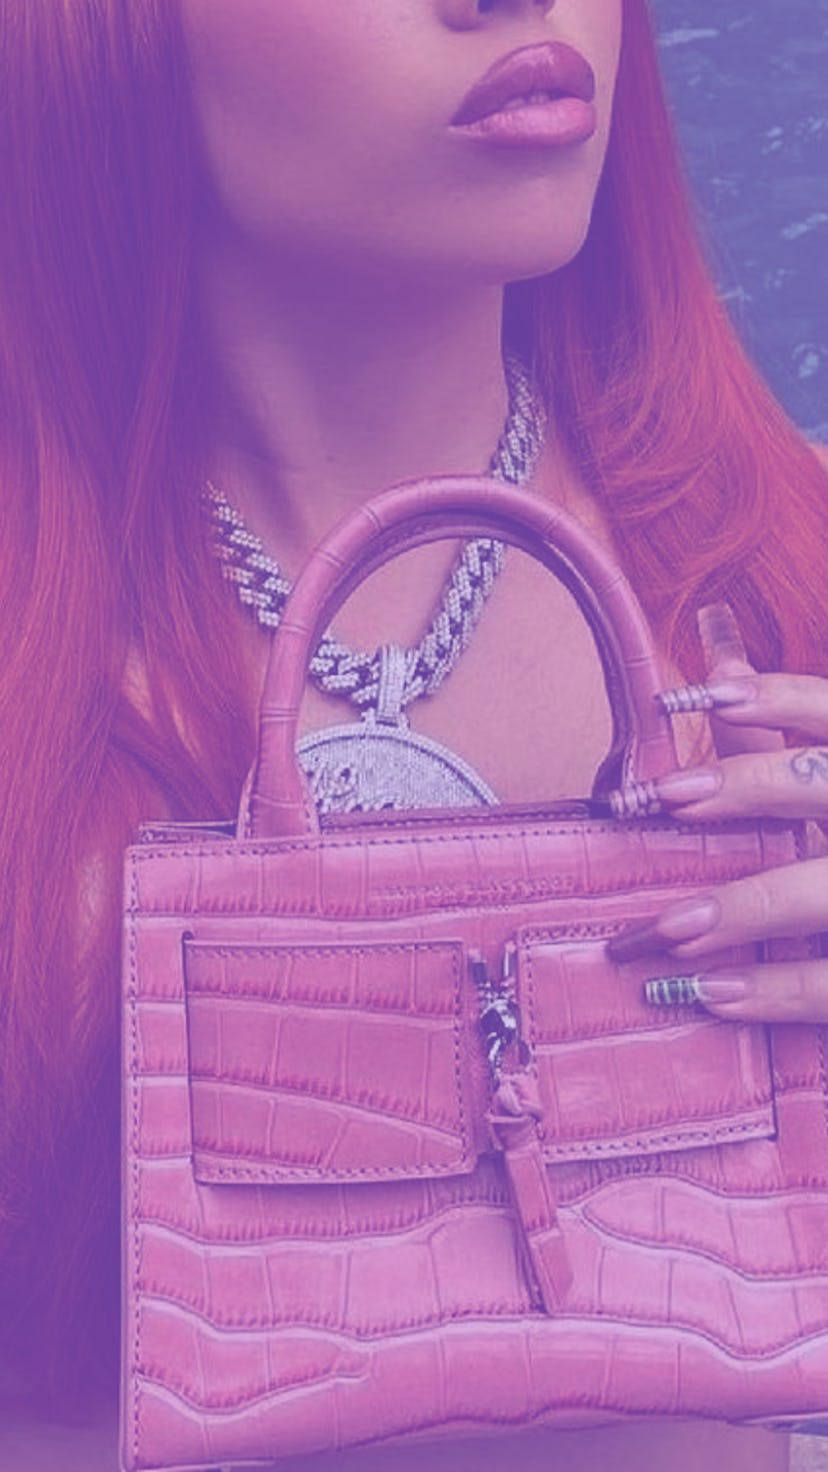 Woman with red hair, wearing a silver necklace, pink purse, and her nails manicured with crocodile n...